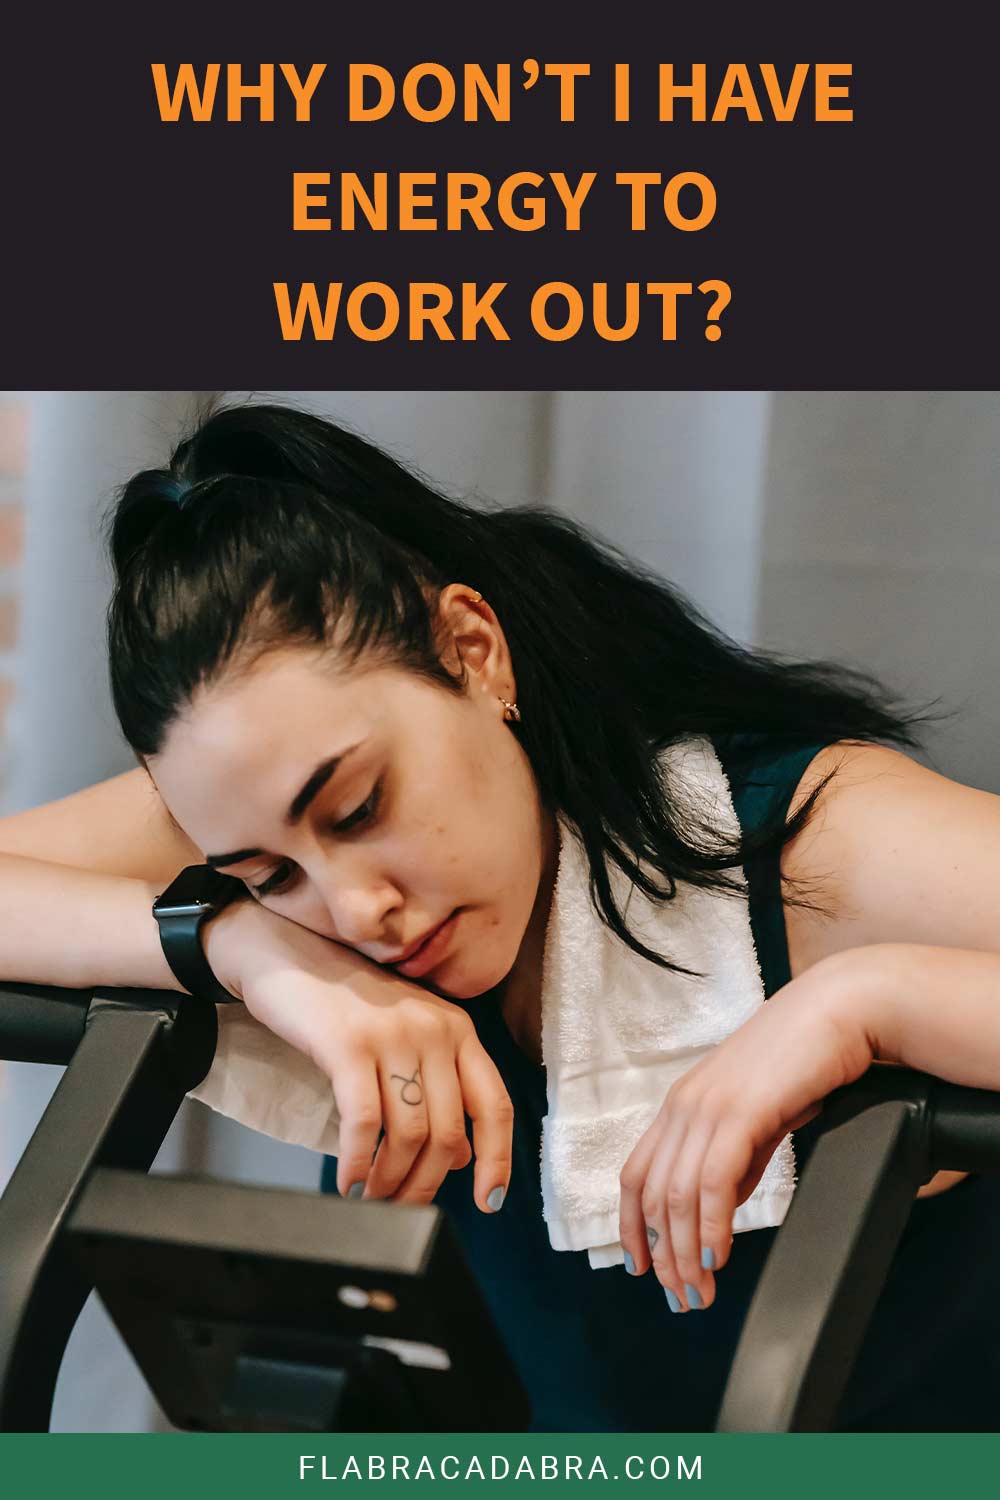 Why Don’t I Have Energy To Work Out?